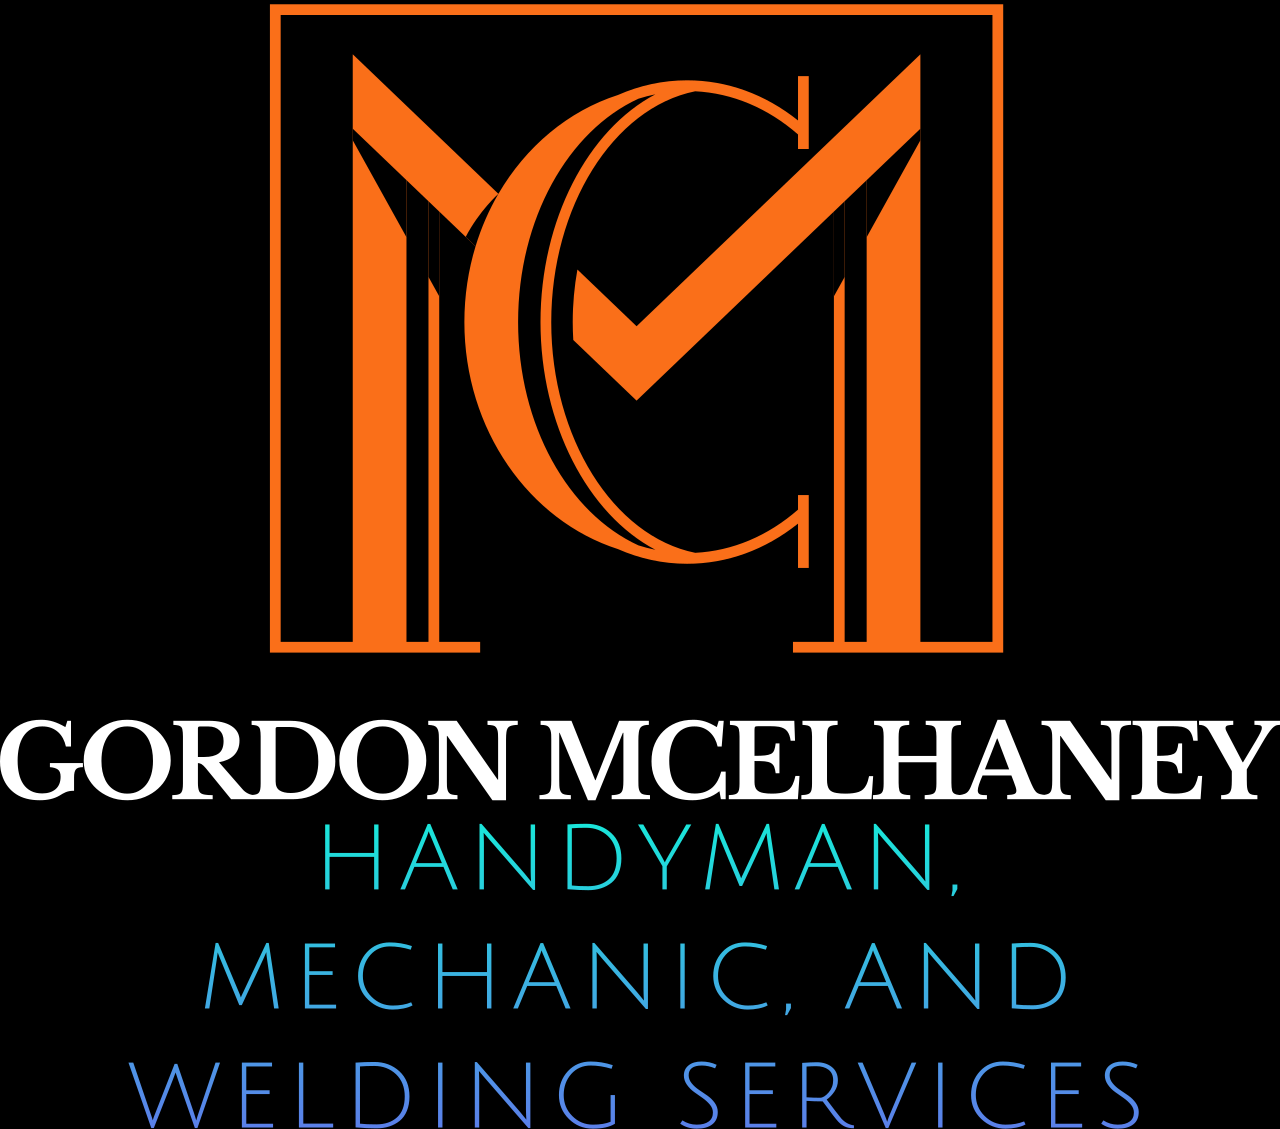 Handyman mechanic and welding services's web page